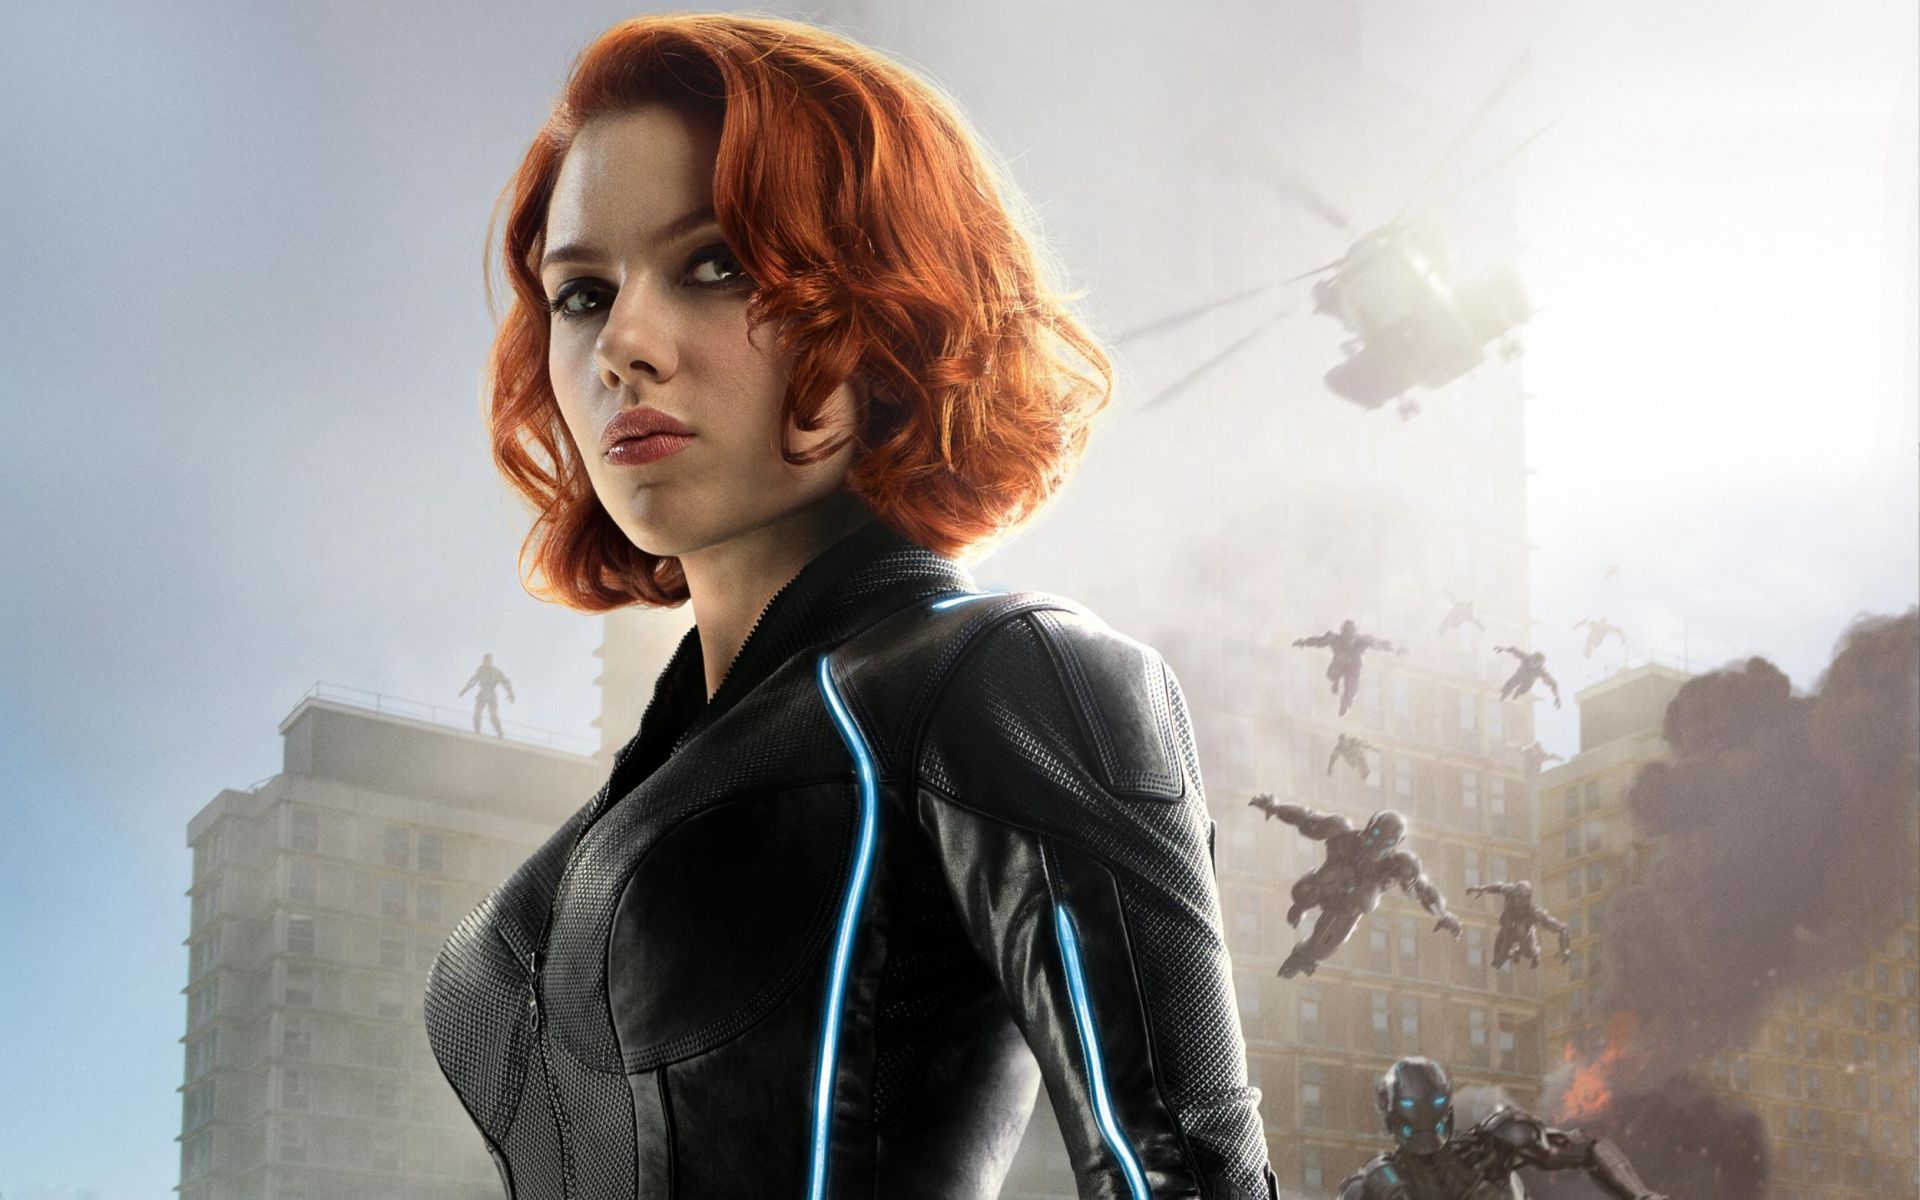 Marvel's Black Widow Drops Trailers With Budapest Locations